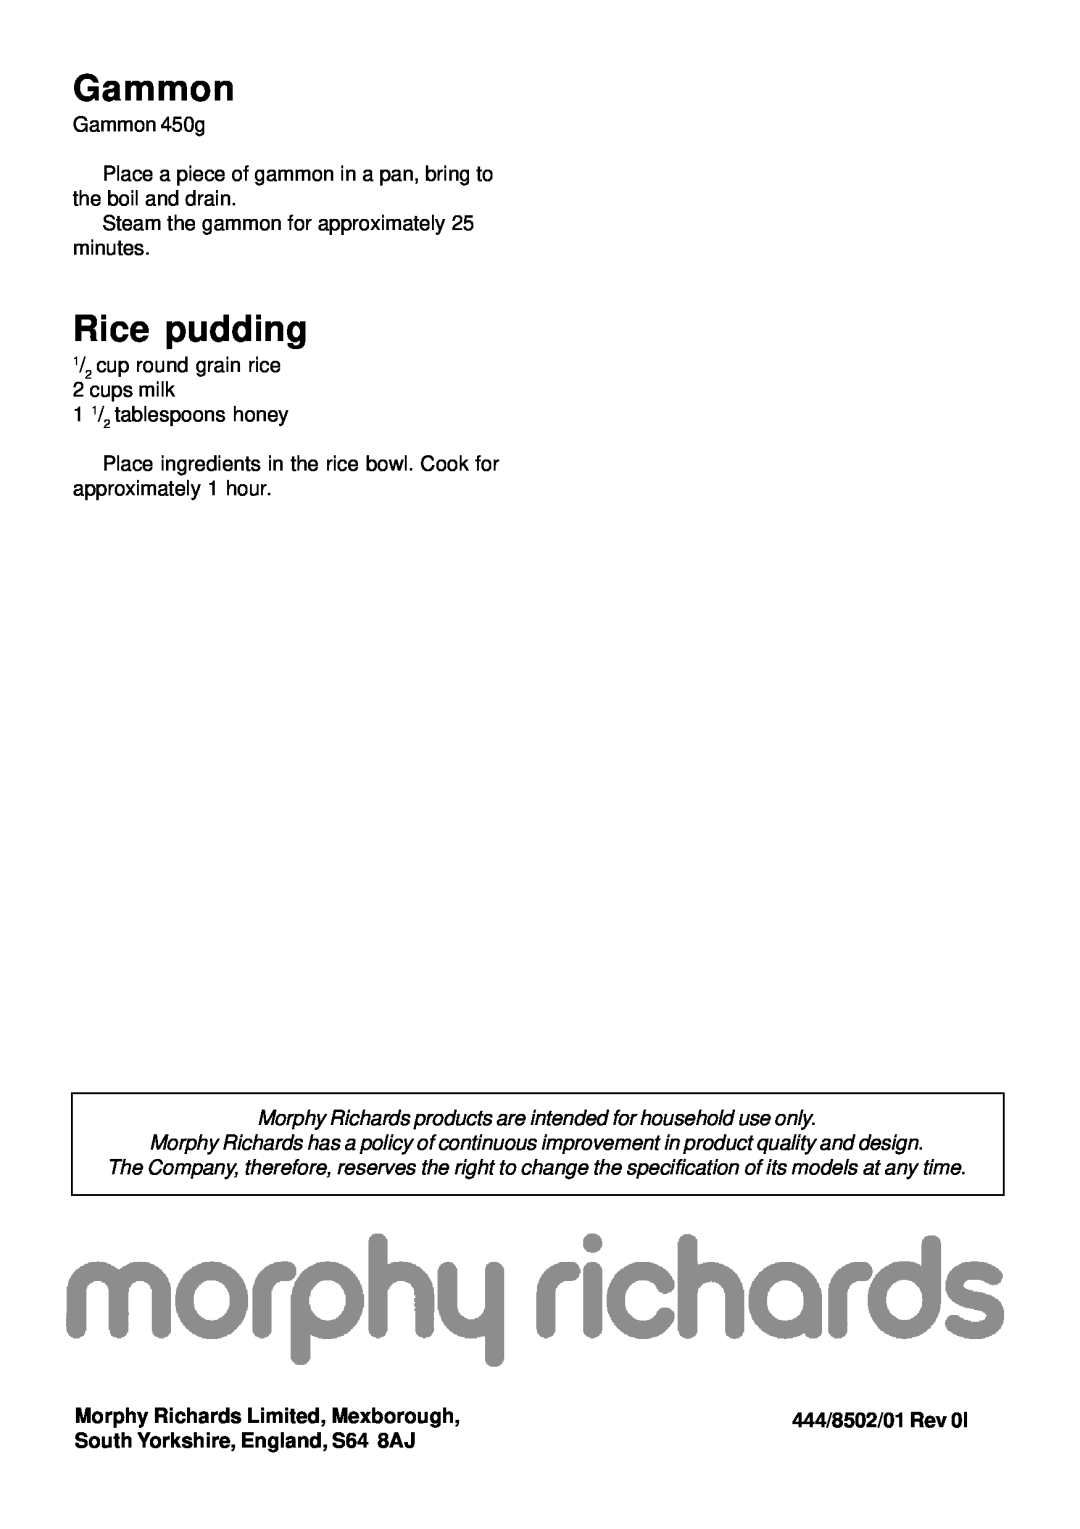 Morphy Richards Electric Steamer manual Gammon, Rice pudding, Morphy Richards Limited, Mexborough 